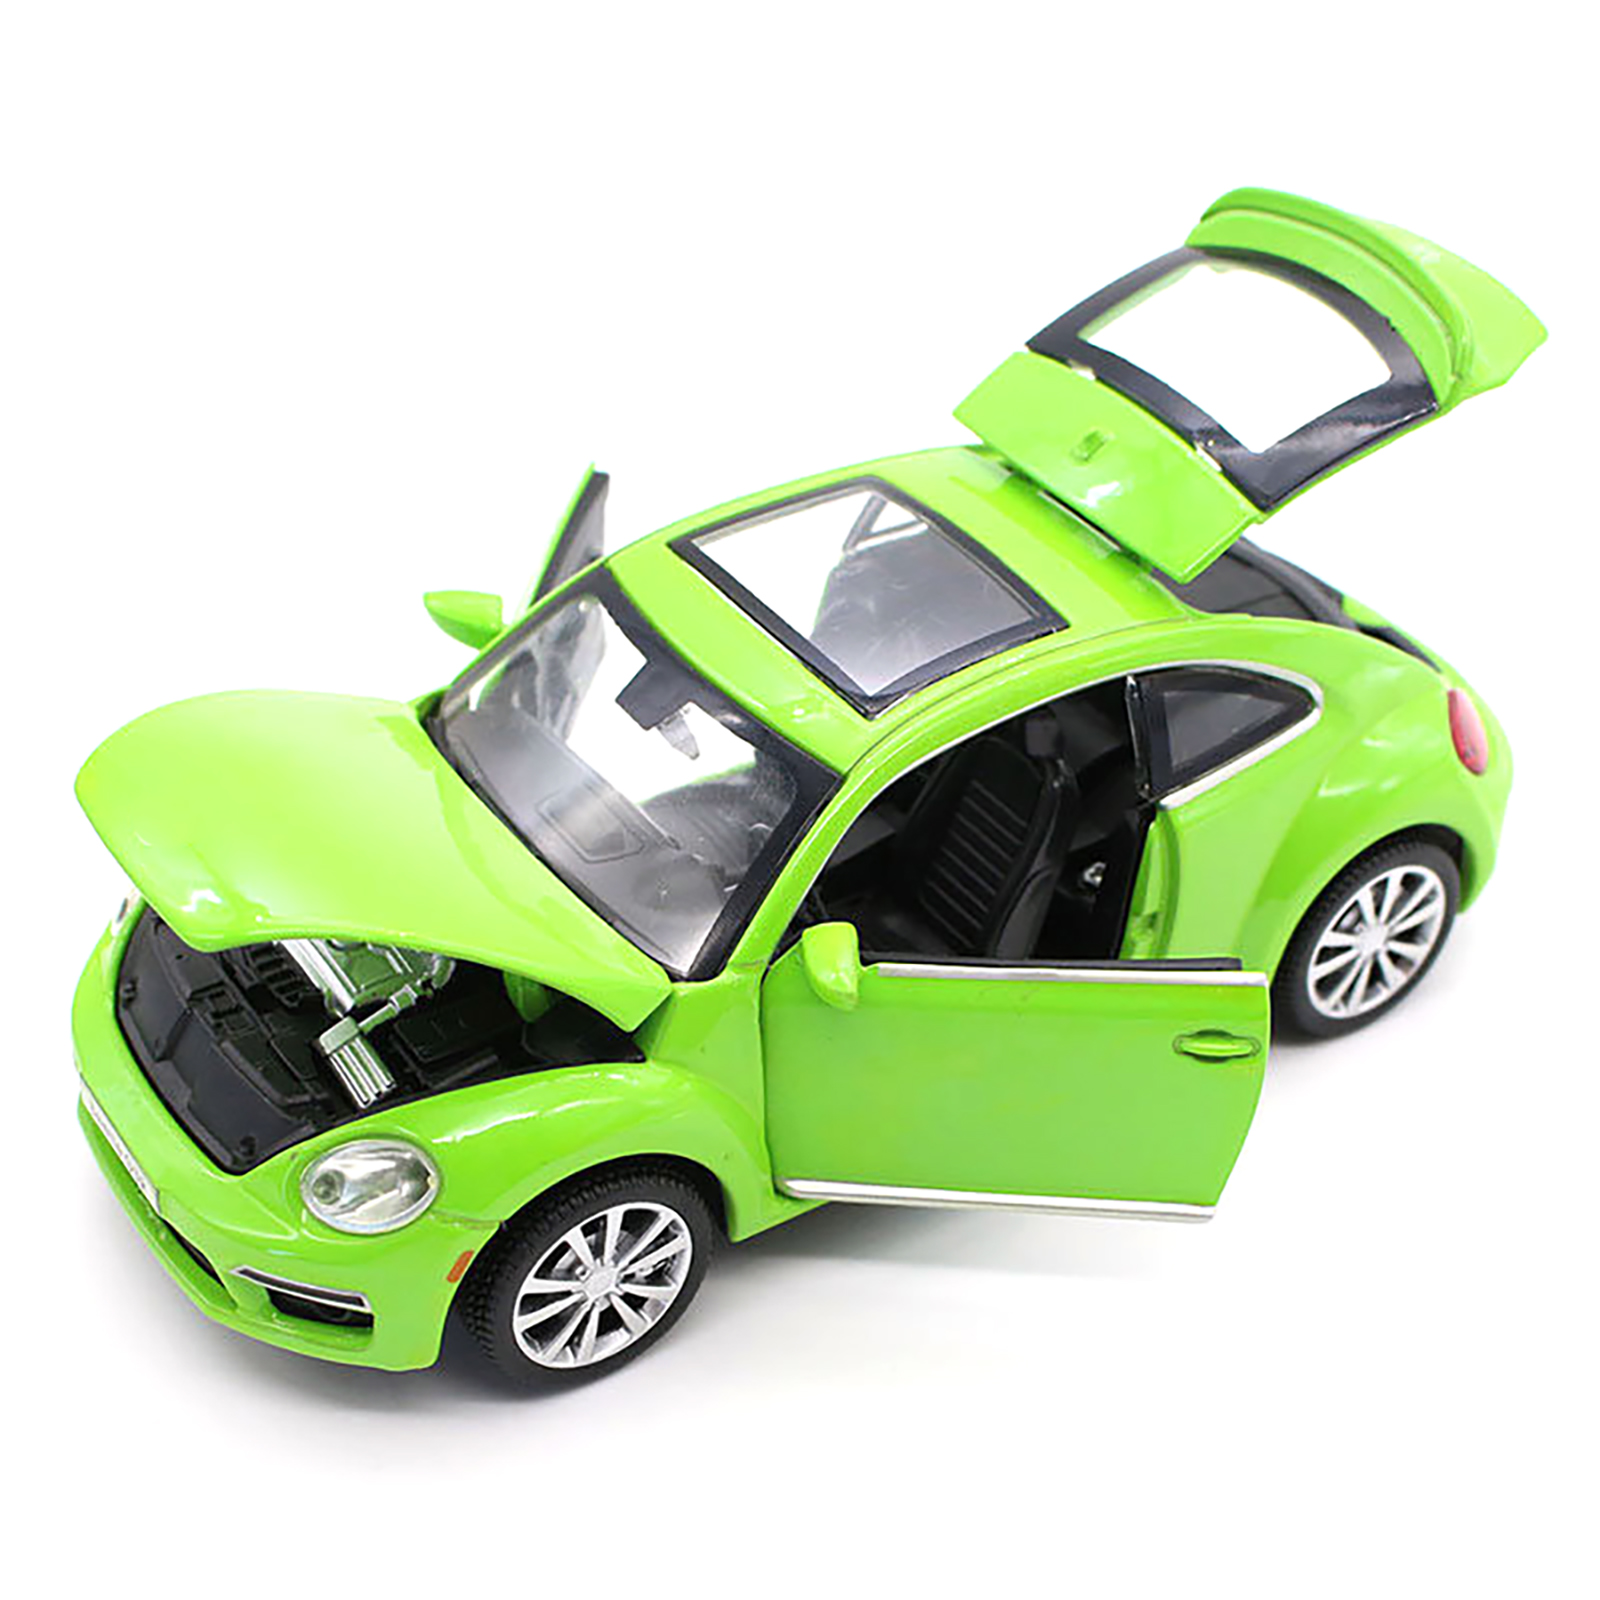 1:32 Simulation Alloy Car Model With Base Die-cast Pull-back Vehicle With Light Sound Openable Door Christmas Gifts For Boys Girls